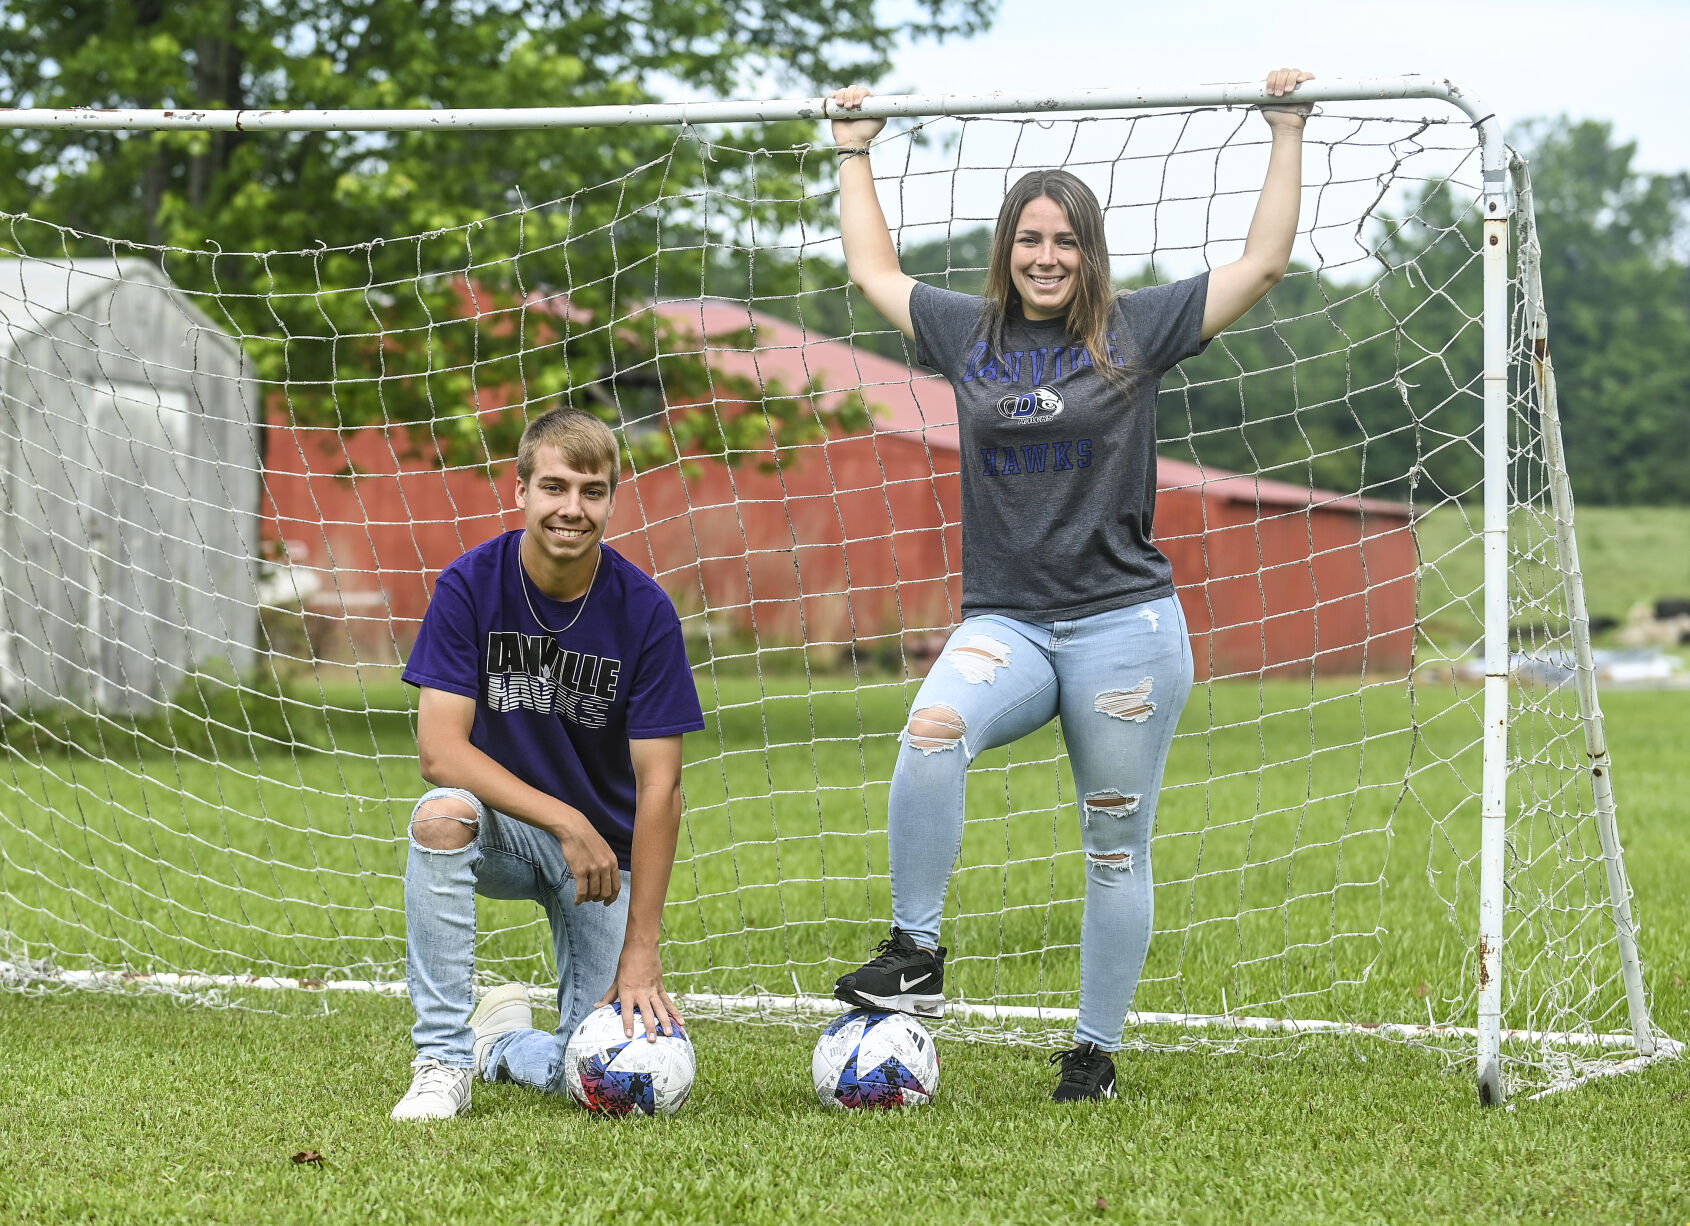 Danville High School Soccer: Hanline Siblings Shine as Coaches and Players